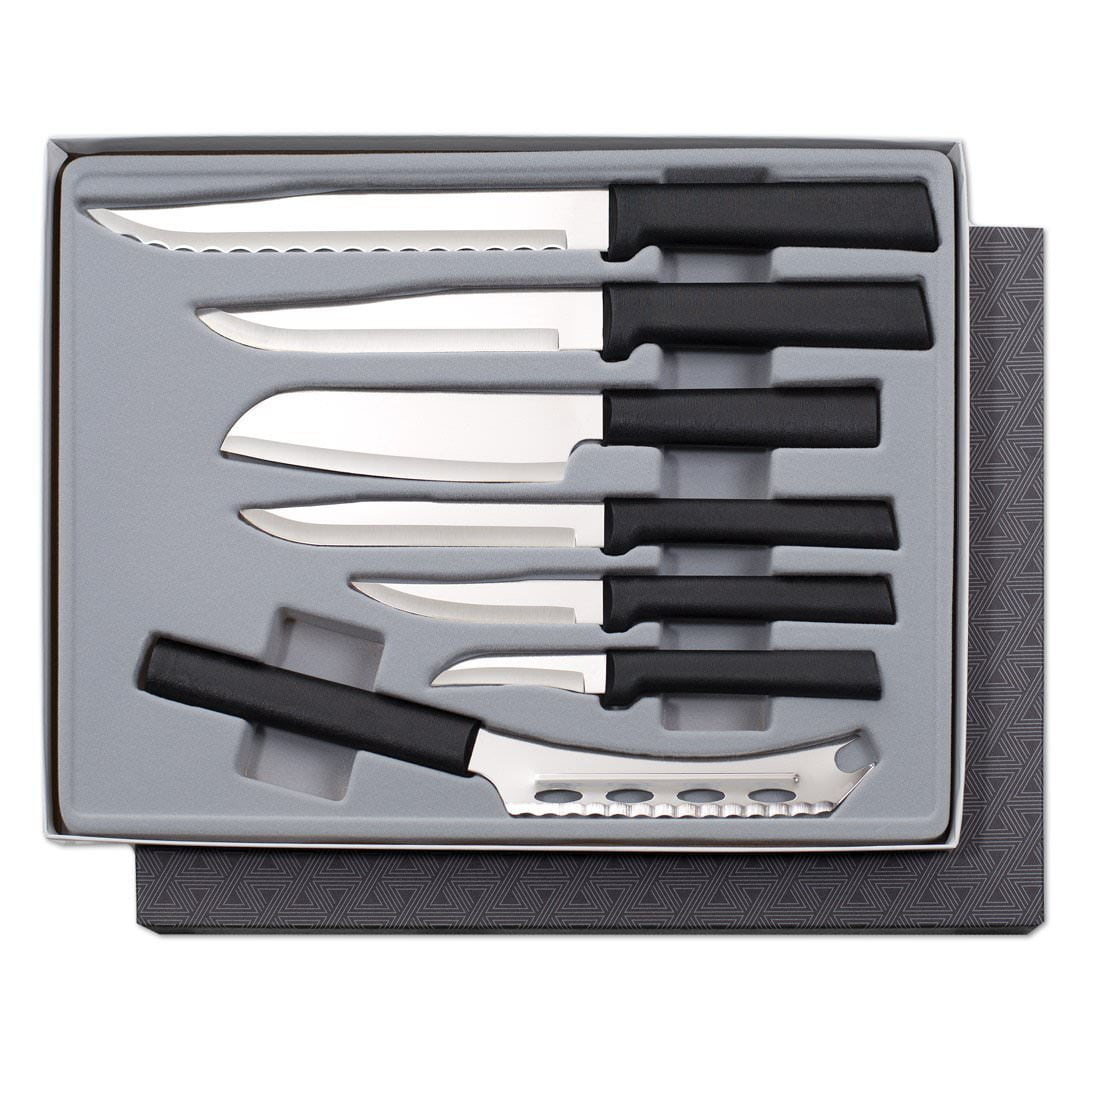 Rada Cutlery Starter Knives Gift Set – Stainless Steel Blades and Black ...